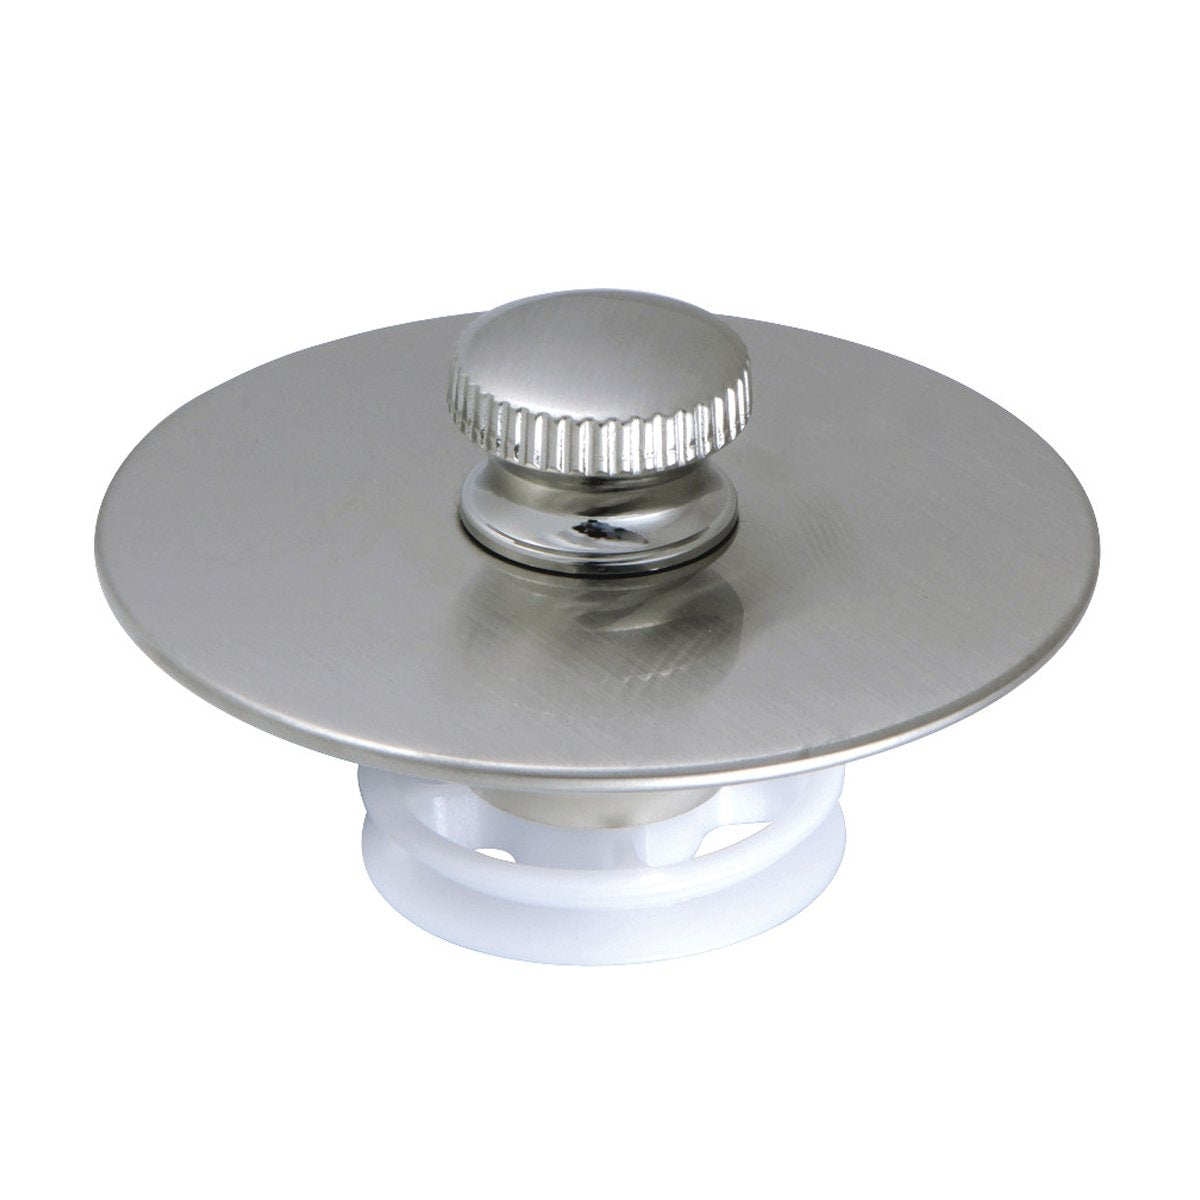 Kingston Brass Quick Cover-Up Tub Stopper